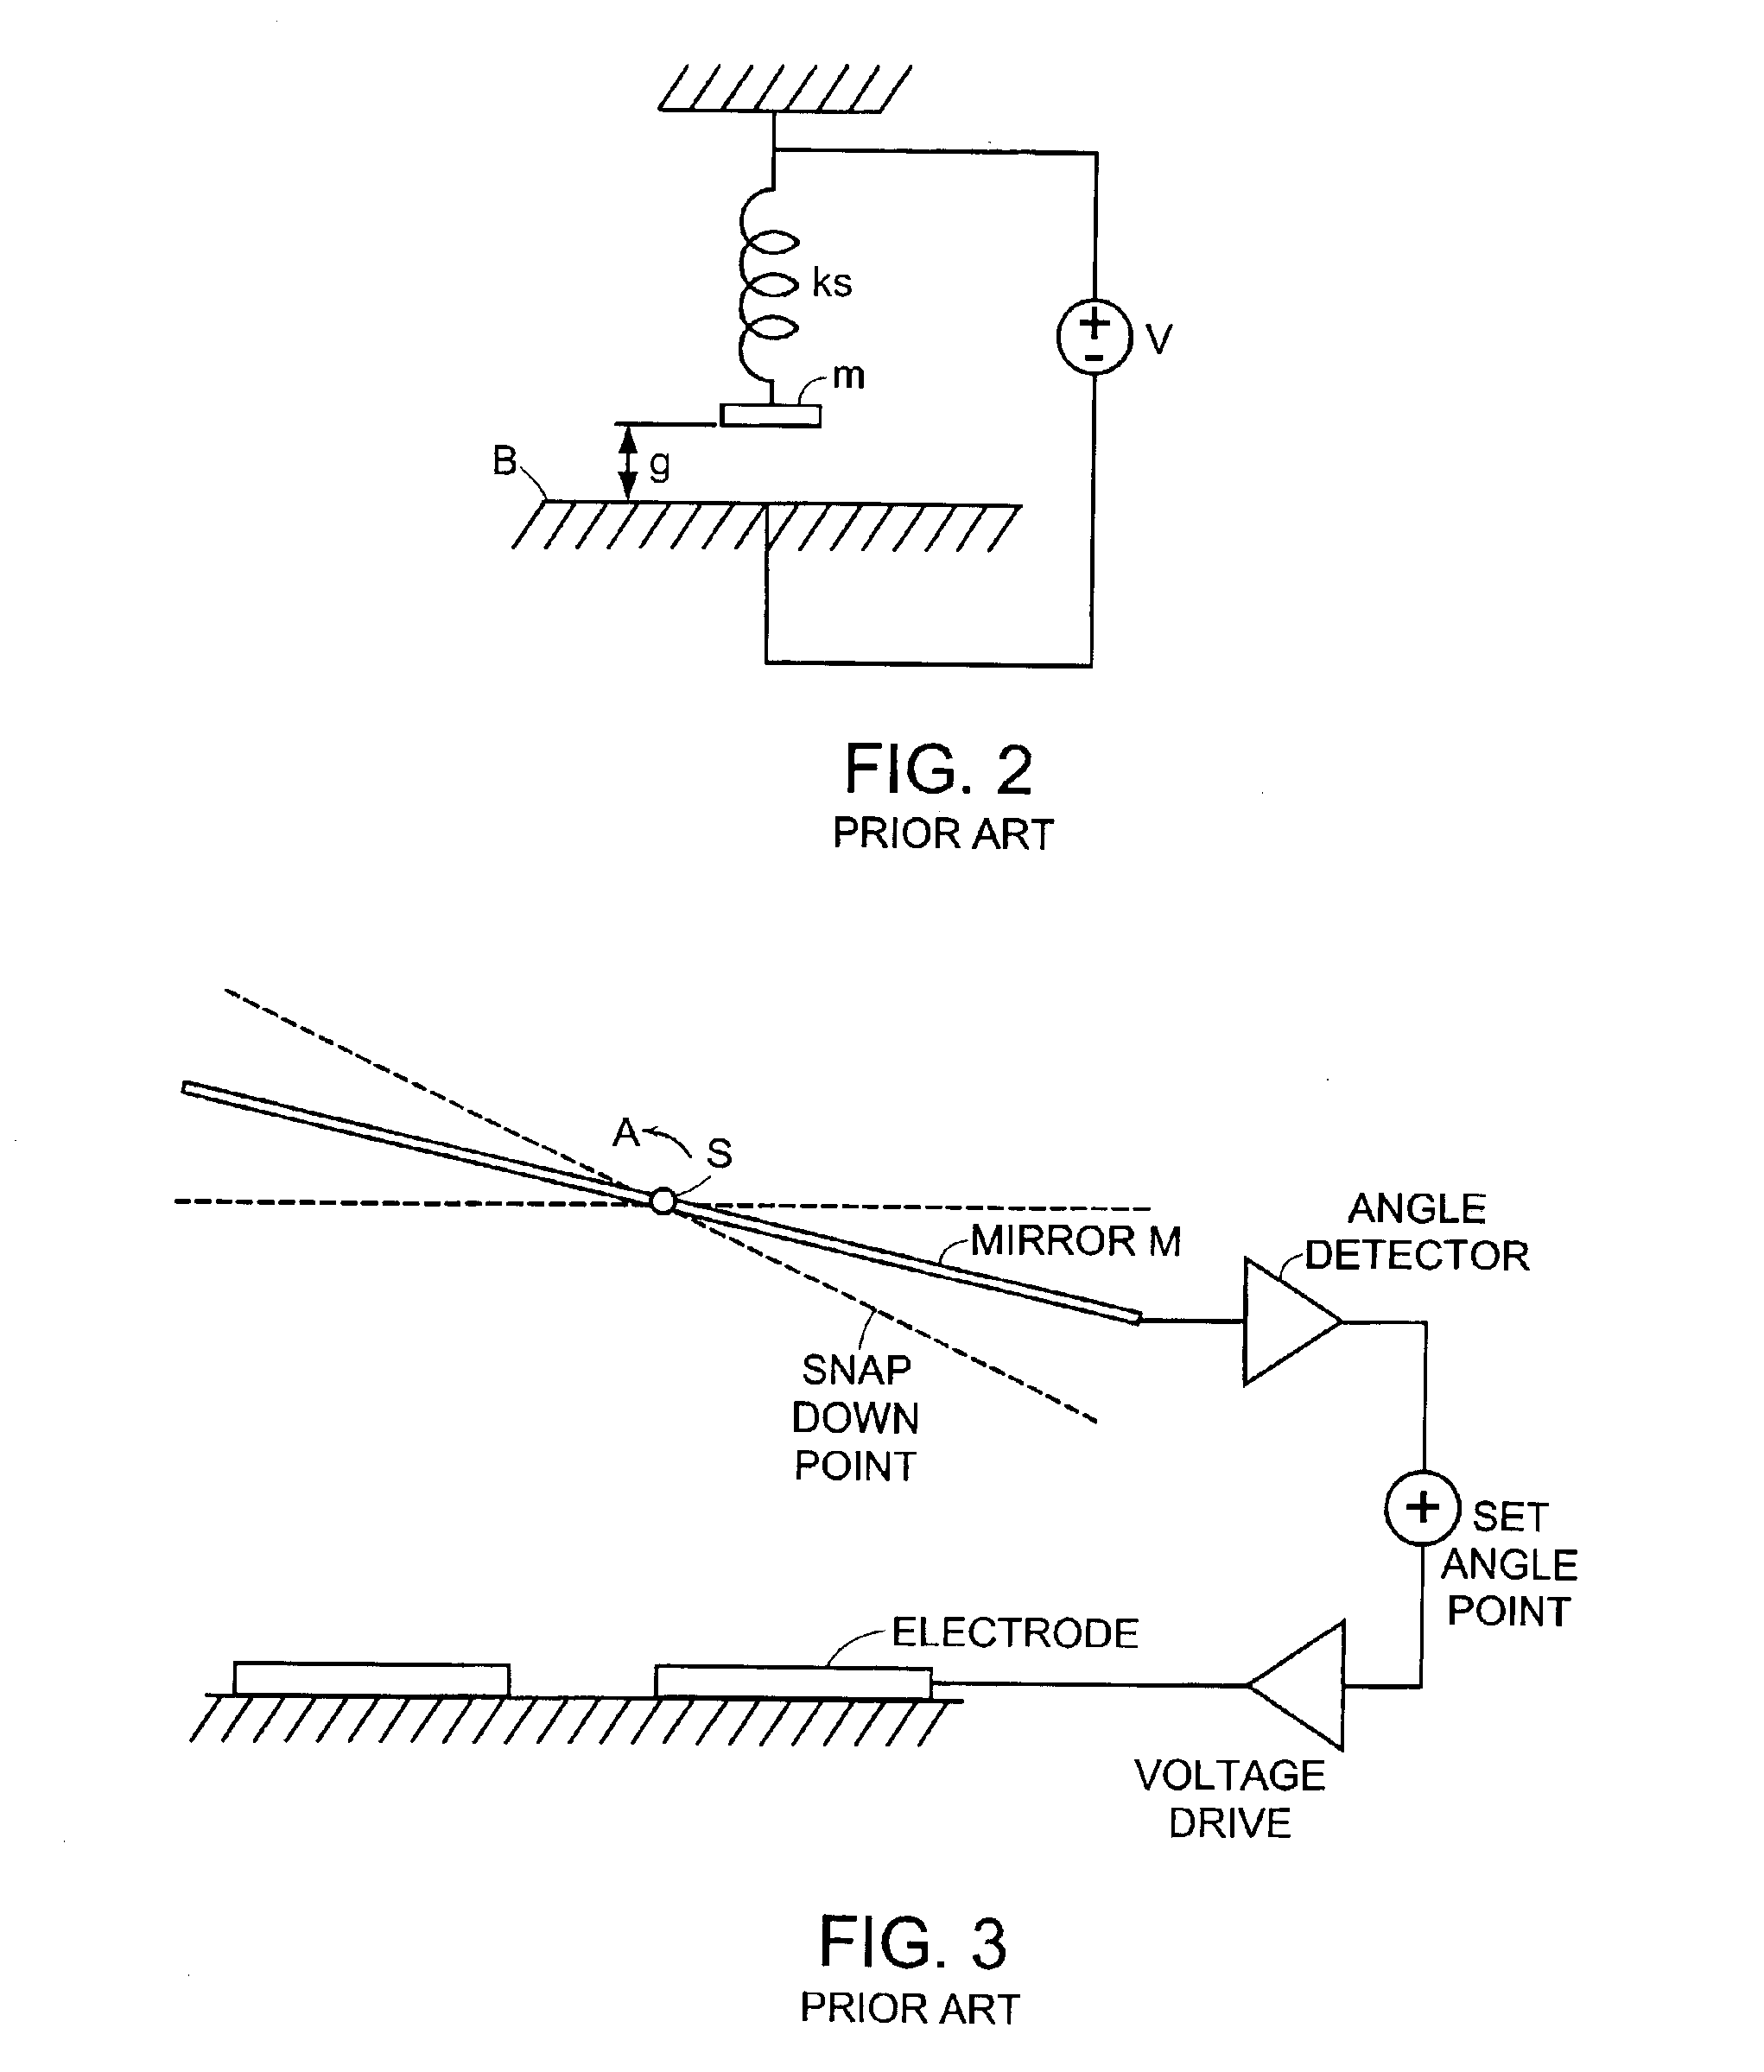 Pointing angle control of electrostatic micro mirrors with modified sliding mode control algorithm for precision control